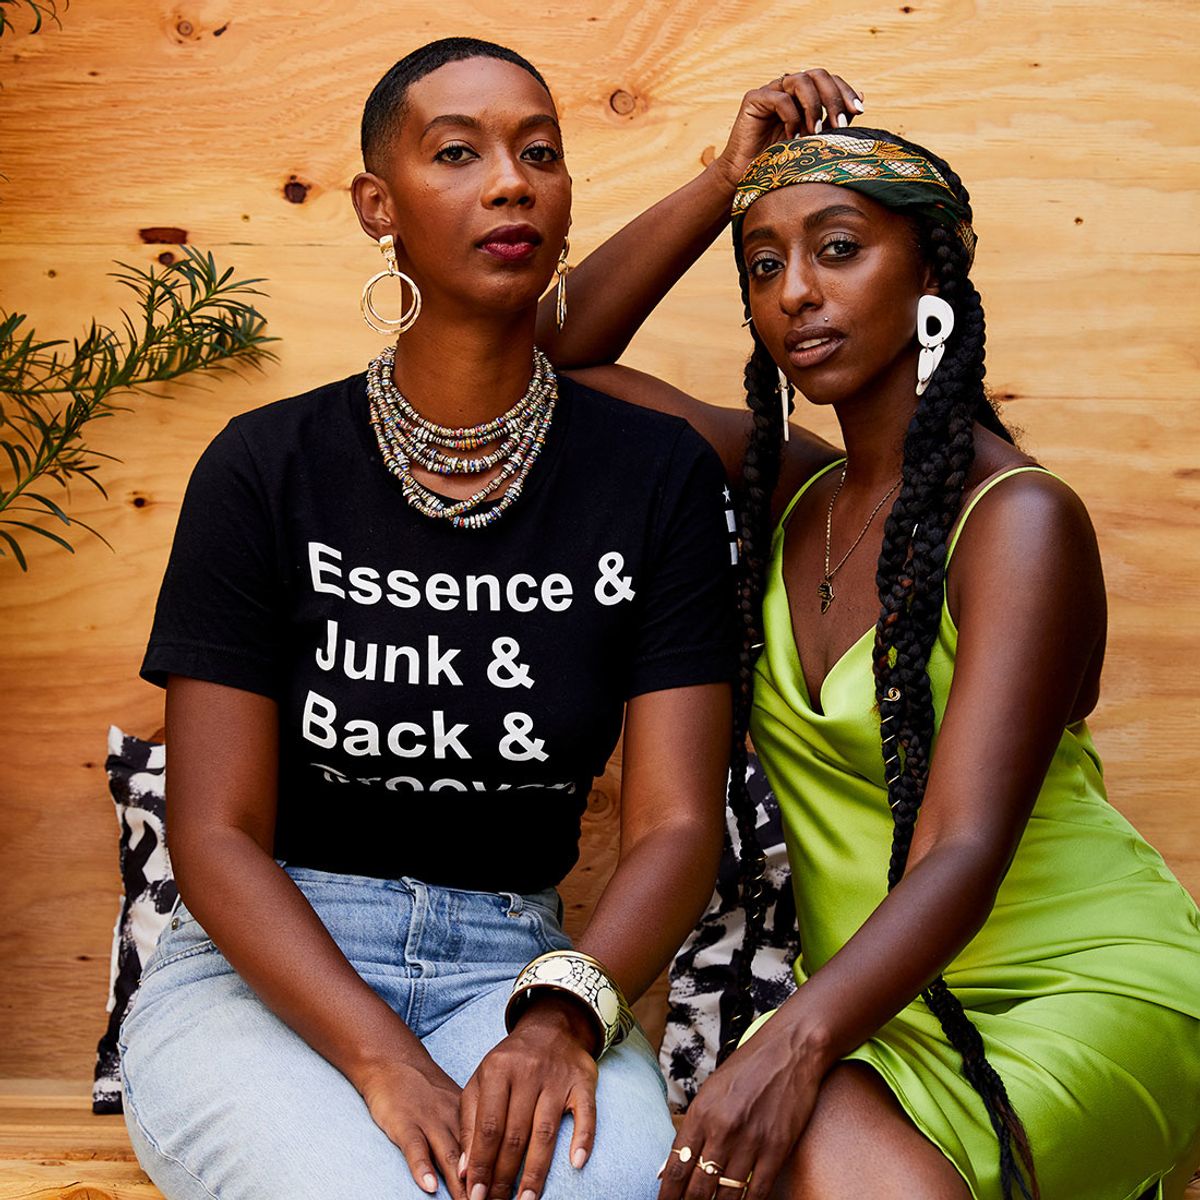 Blk Girls Green House is About Growth, Activism and, Yes, Plant Lady Goals